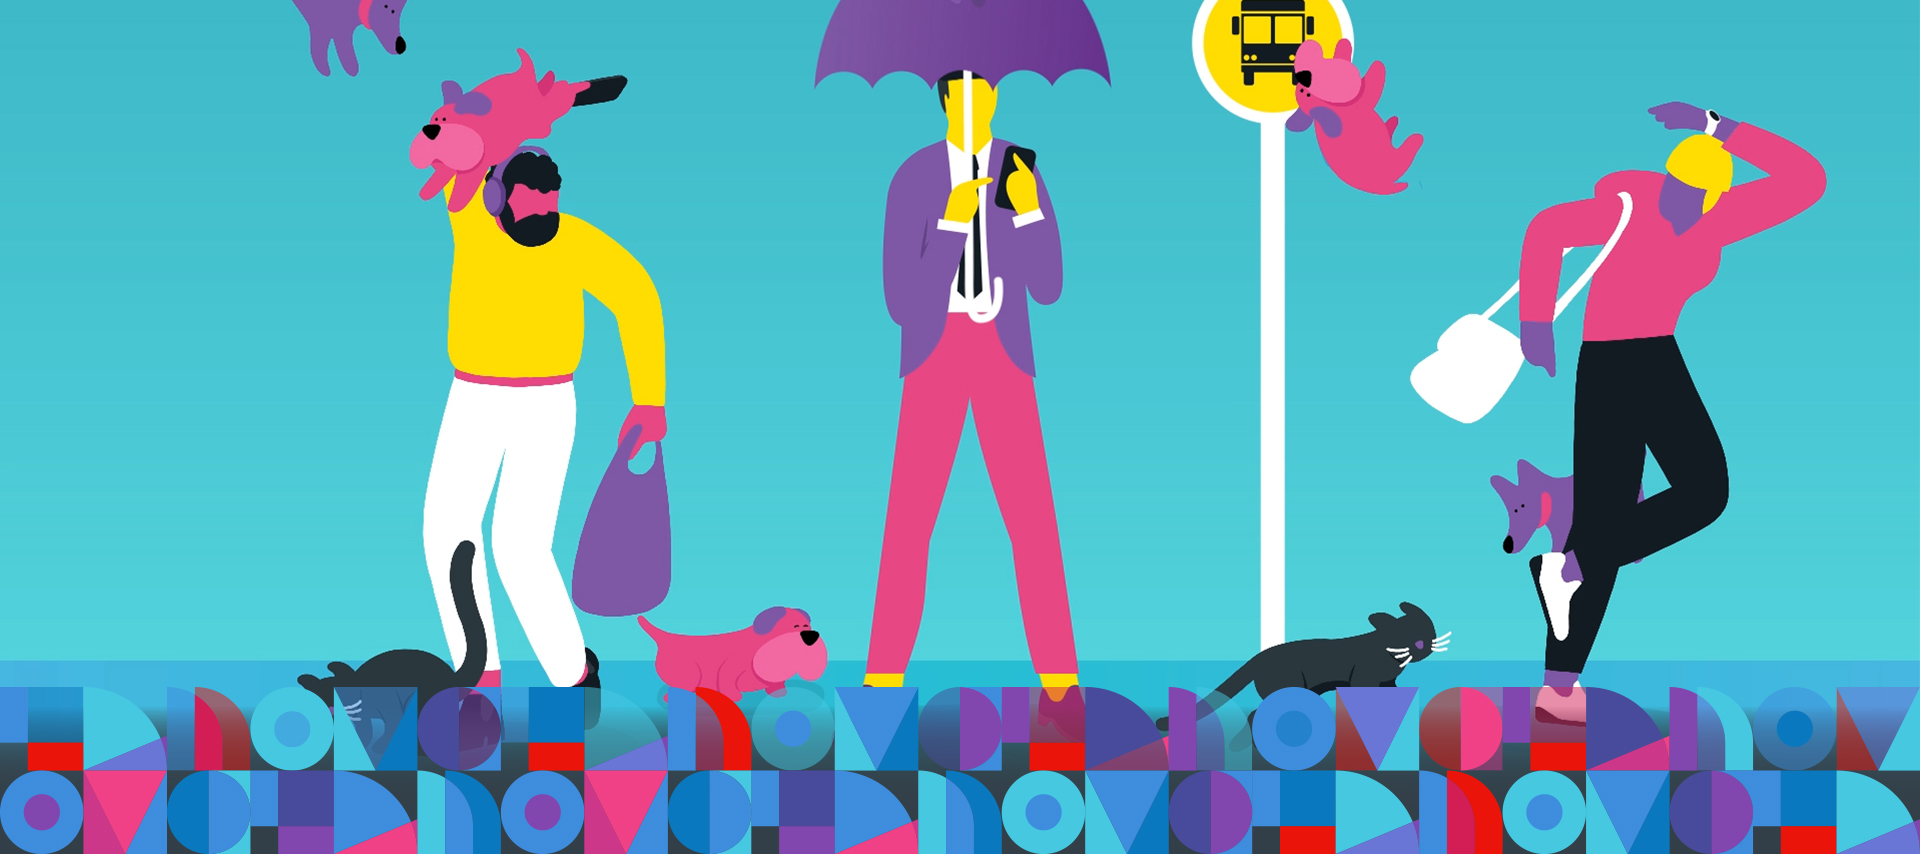 Colorful illustration of three people at a bus stop with cats and dogs falling from the sky